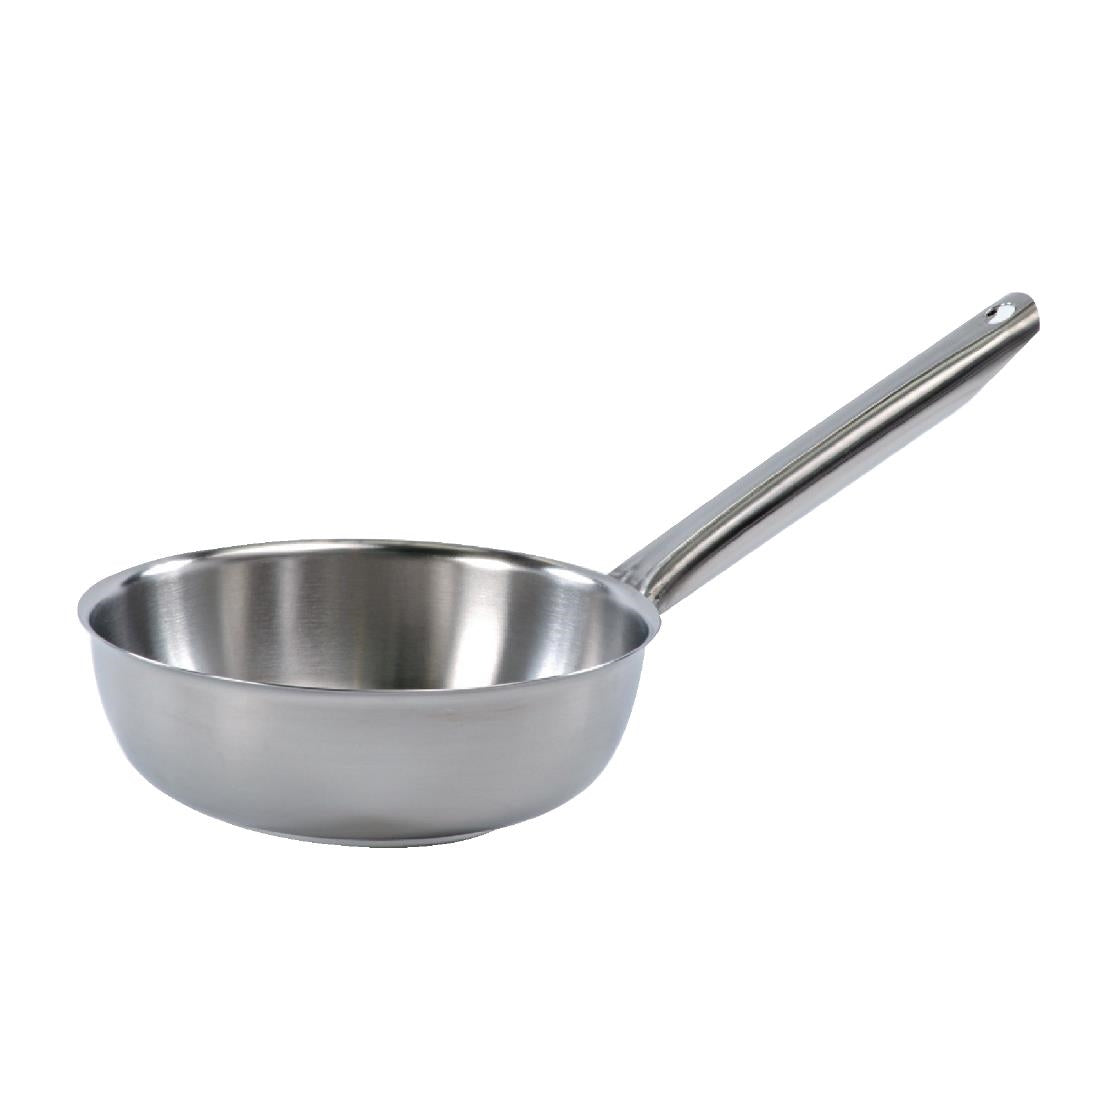 Bourgeat Tradition Plus Flared Saute Pan 240mm JD Catering Equipment Solutions Ltd